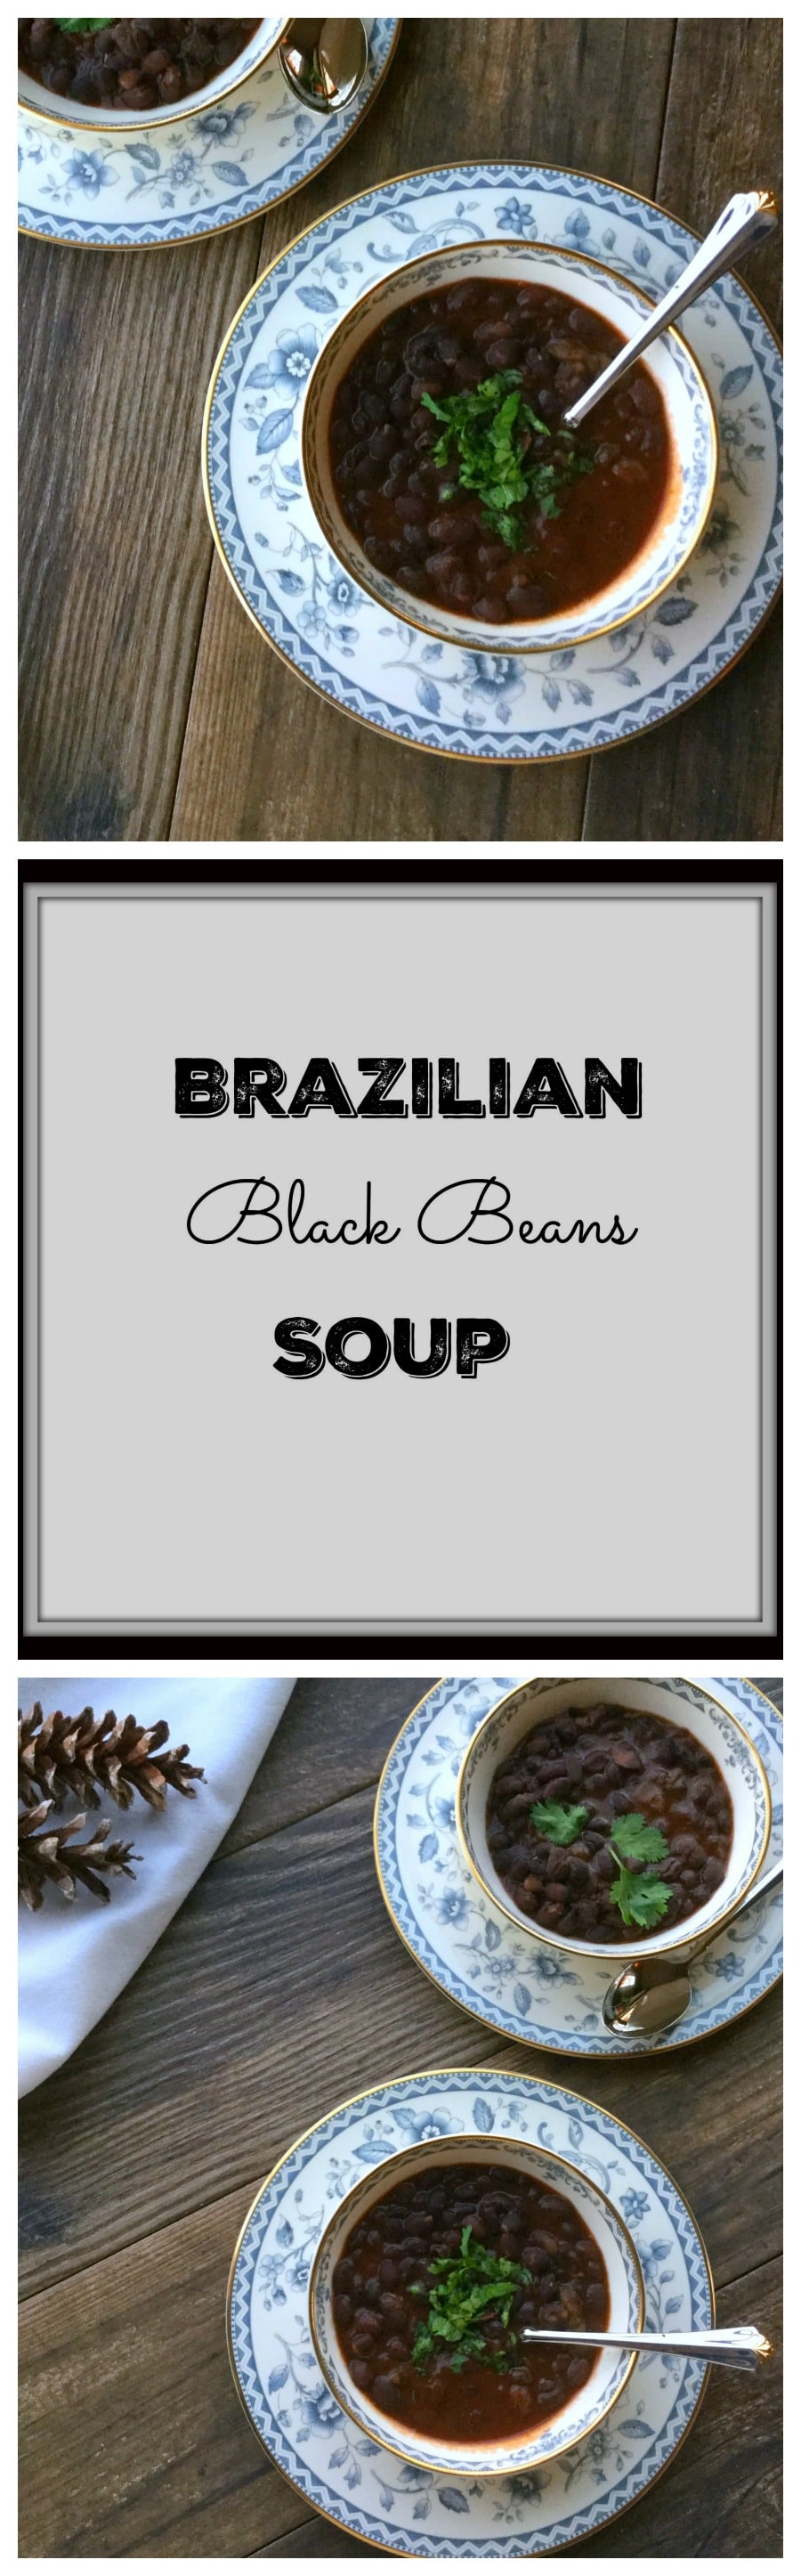 What a delicious way to pack in some nutrition while enjoying a tasty soup! This black beans soup is all about the flavors. So filling and satisfying, this soup is a one dish meal.